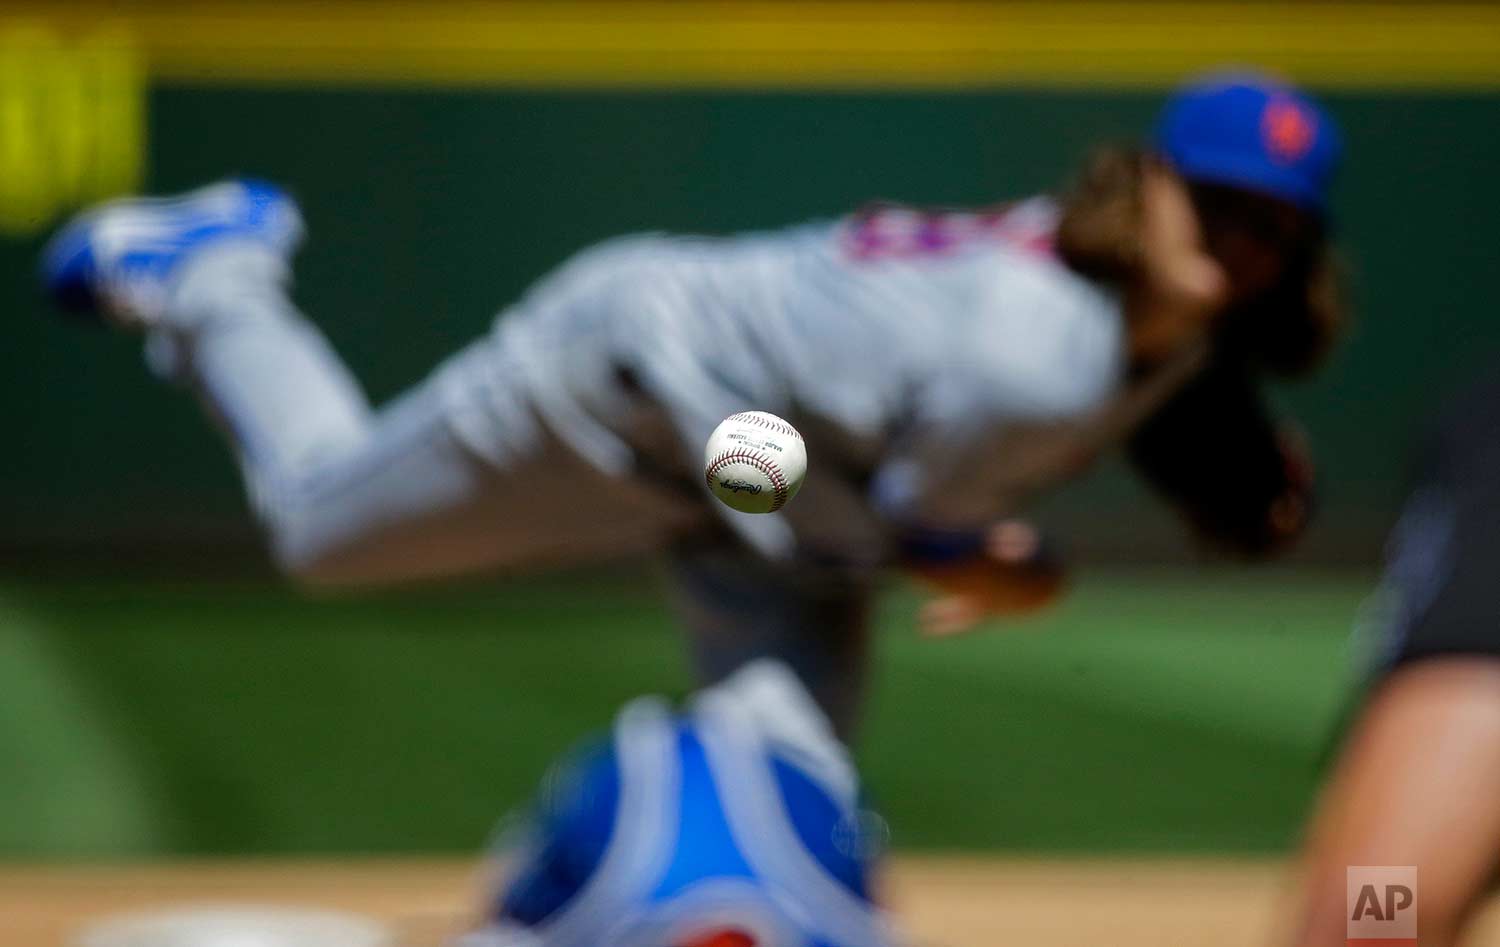  New York Mets starting pitcher Jacob deGrom pitches the ball during the fifth inning of the team's baseball game against the Seattle Mariners in Seattle on Saturday, July 29, 2017. (AP Photo/Ted S. Warren) 